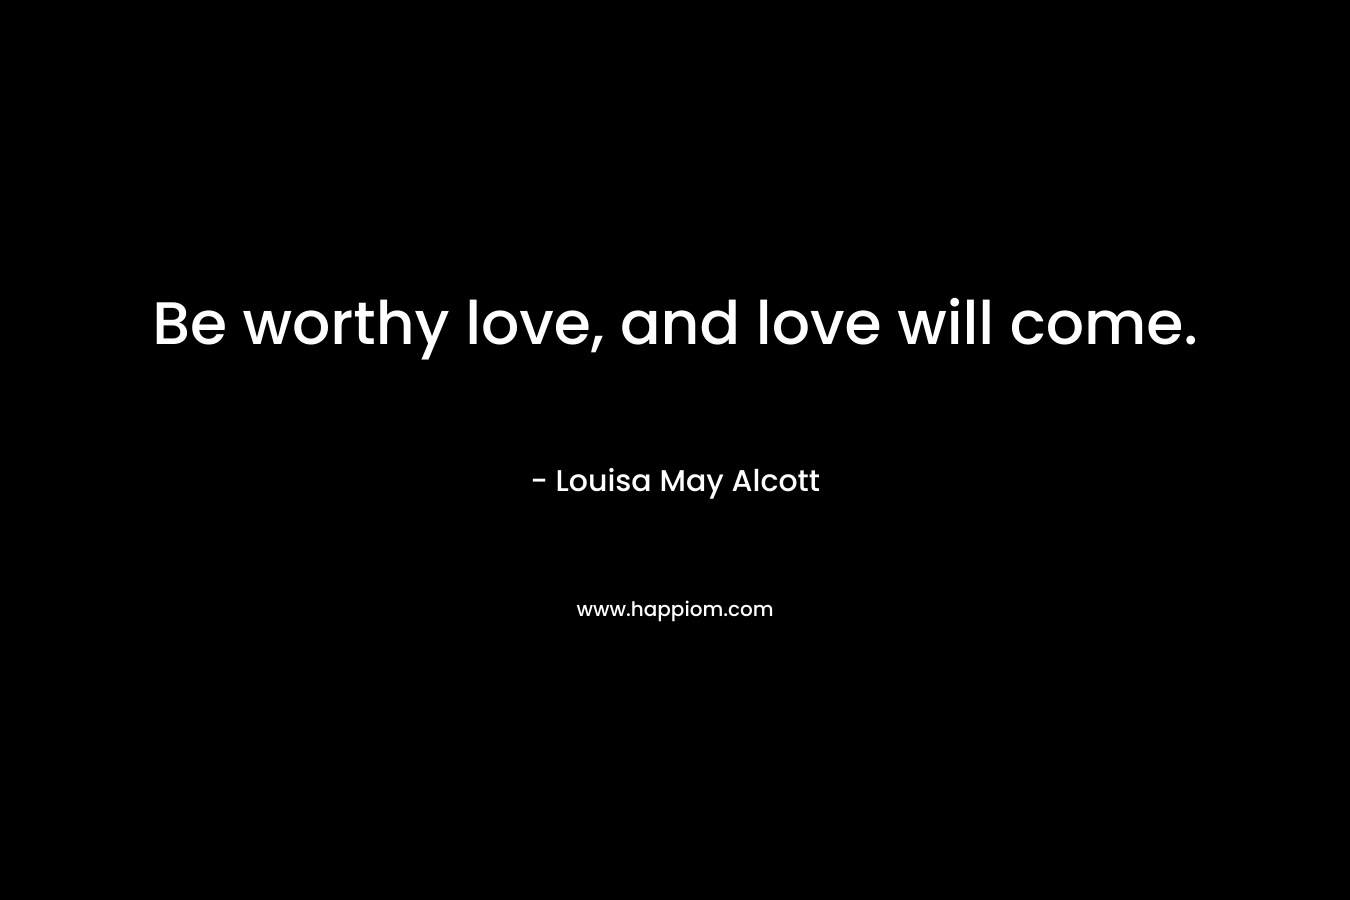 Be worthy love, and love will come.